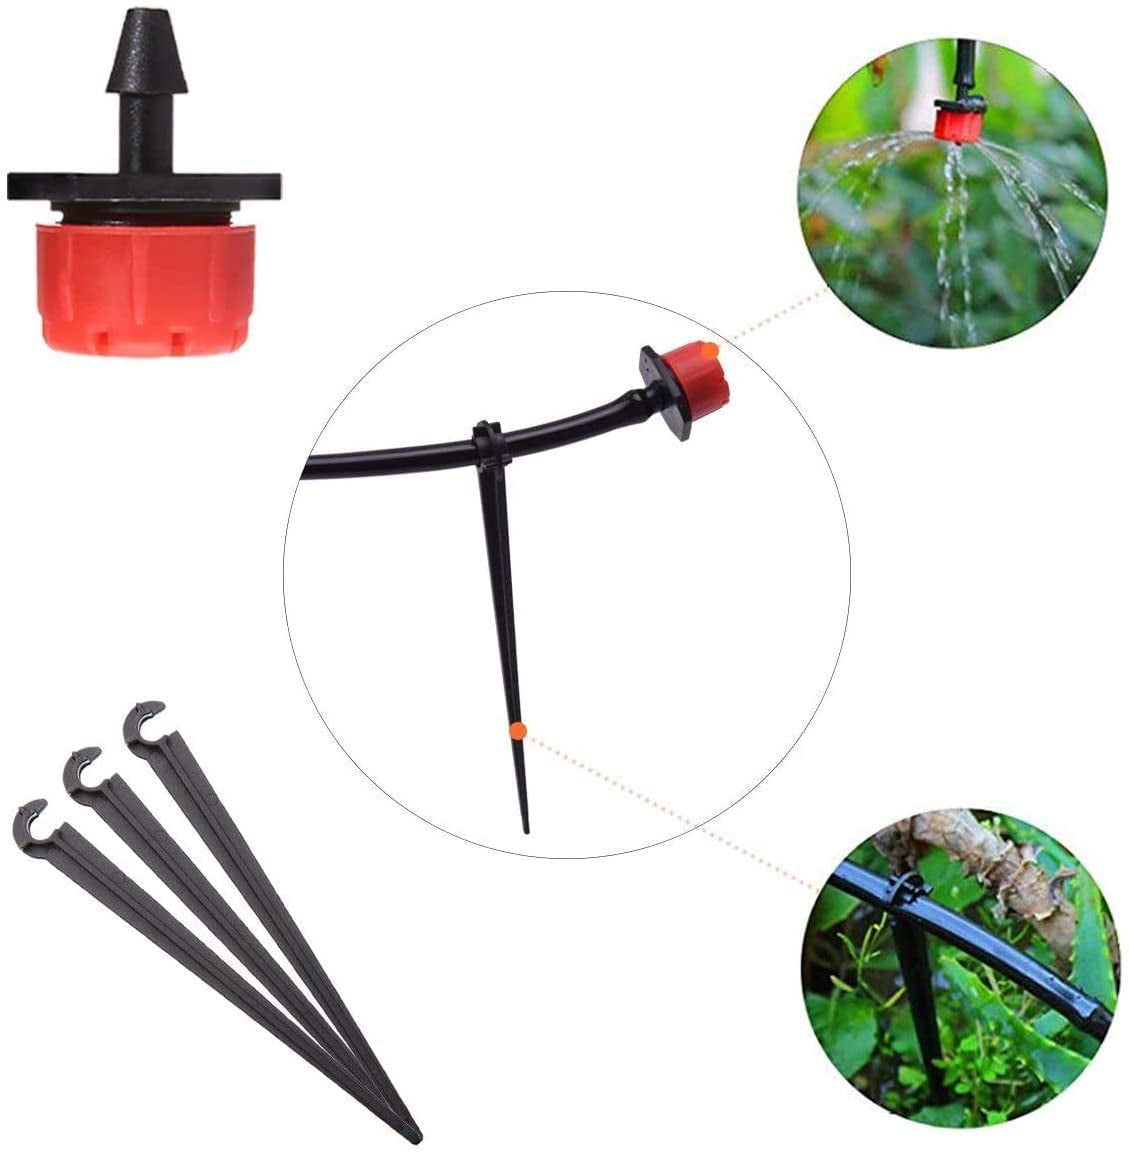 Lawn Flower Bed Patio 1/4 Blank Distribution Tubing Garden Watering System/DIY Self Plant Garden Hose Watering Kit （red） for Garden Greenhouse MSDADA 82ft Watering System for Plants 